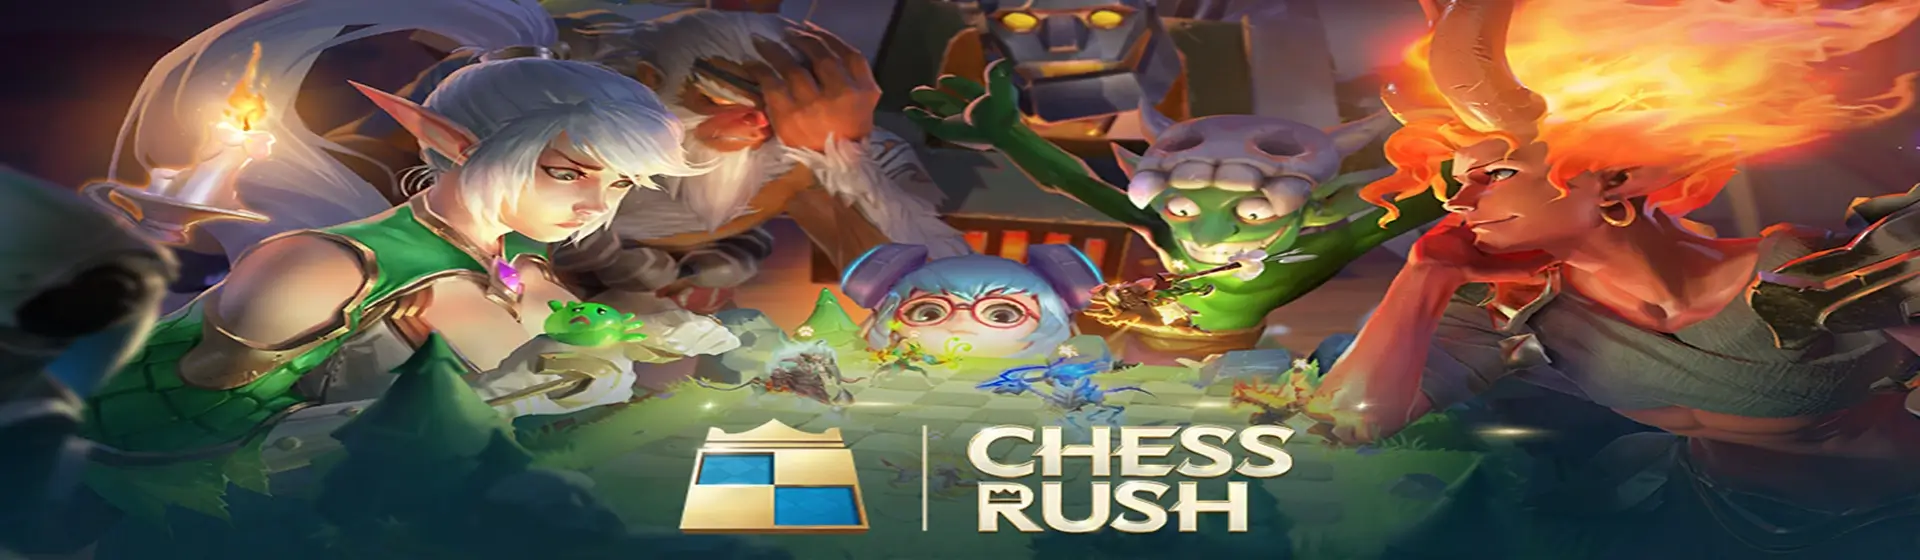 Chess Rush (by Tencent Games) Android Gameplay 